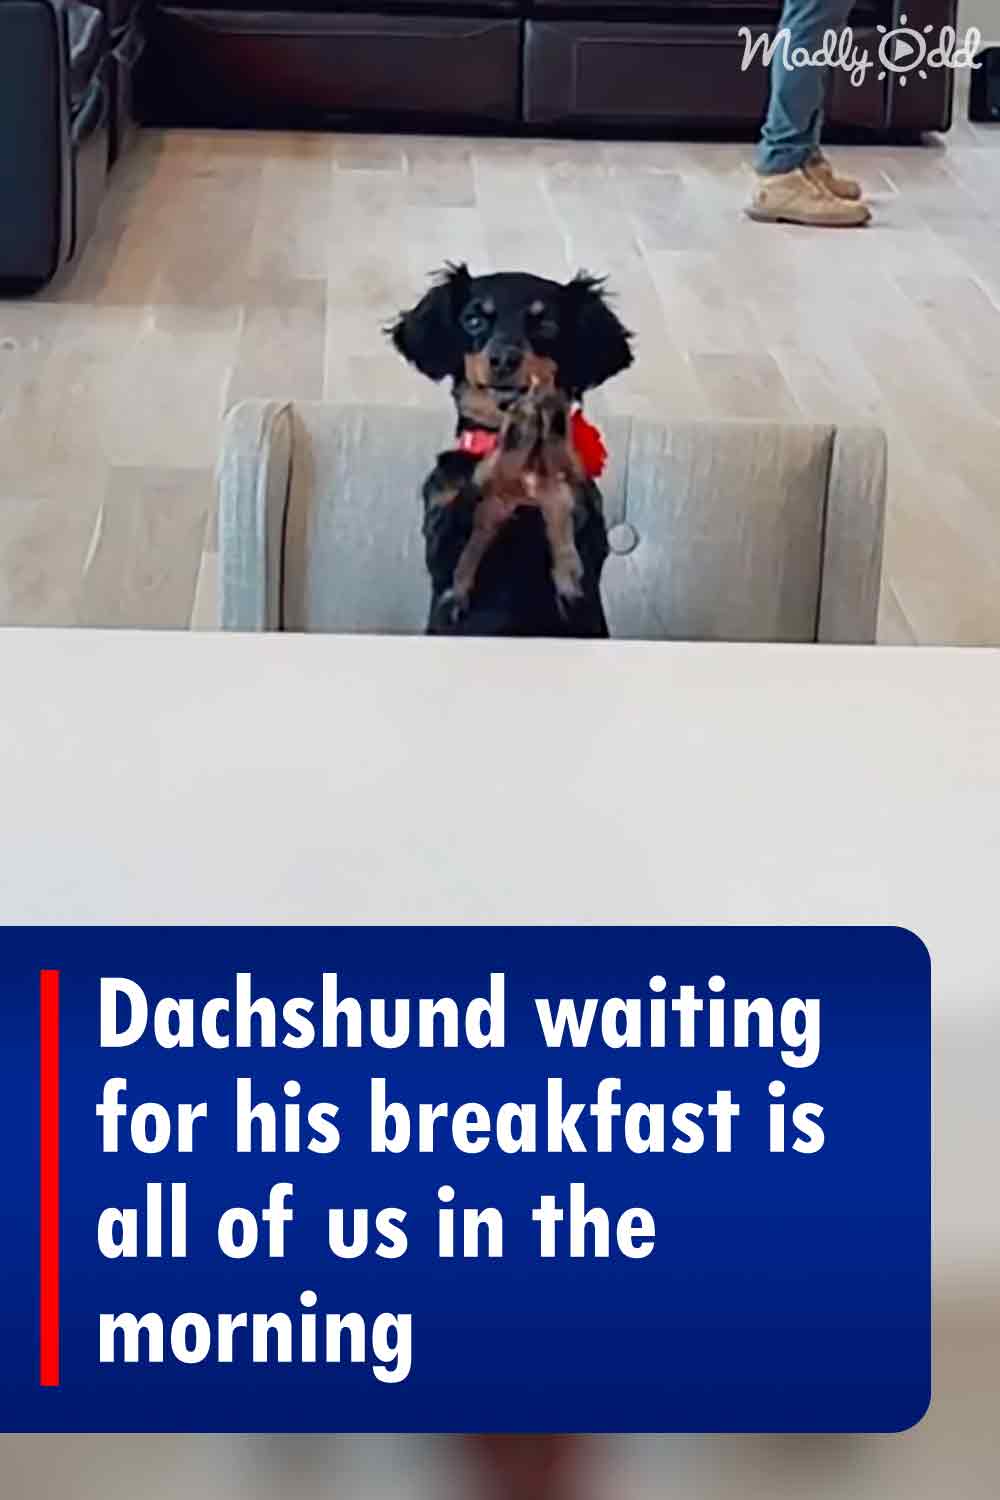 Dachshund waiting for his breakfast is all of us in the morning